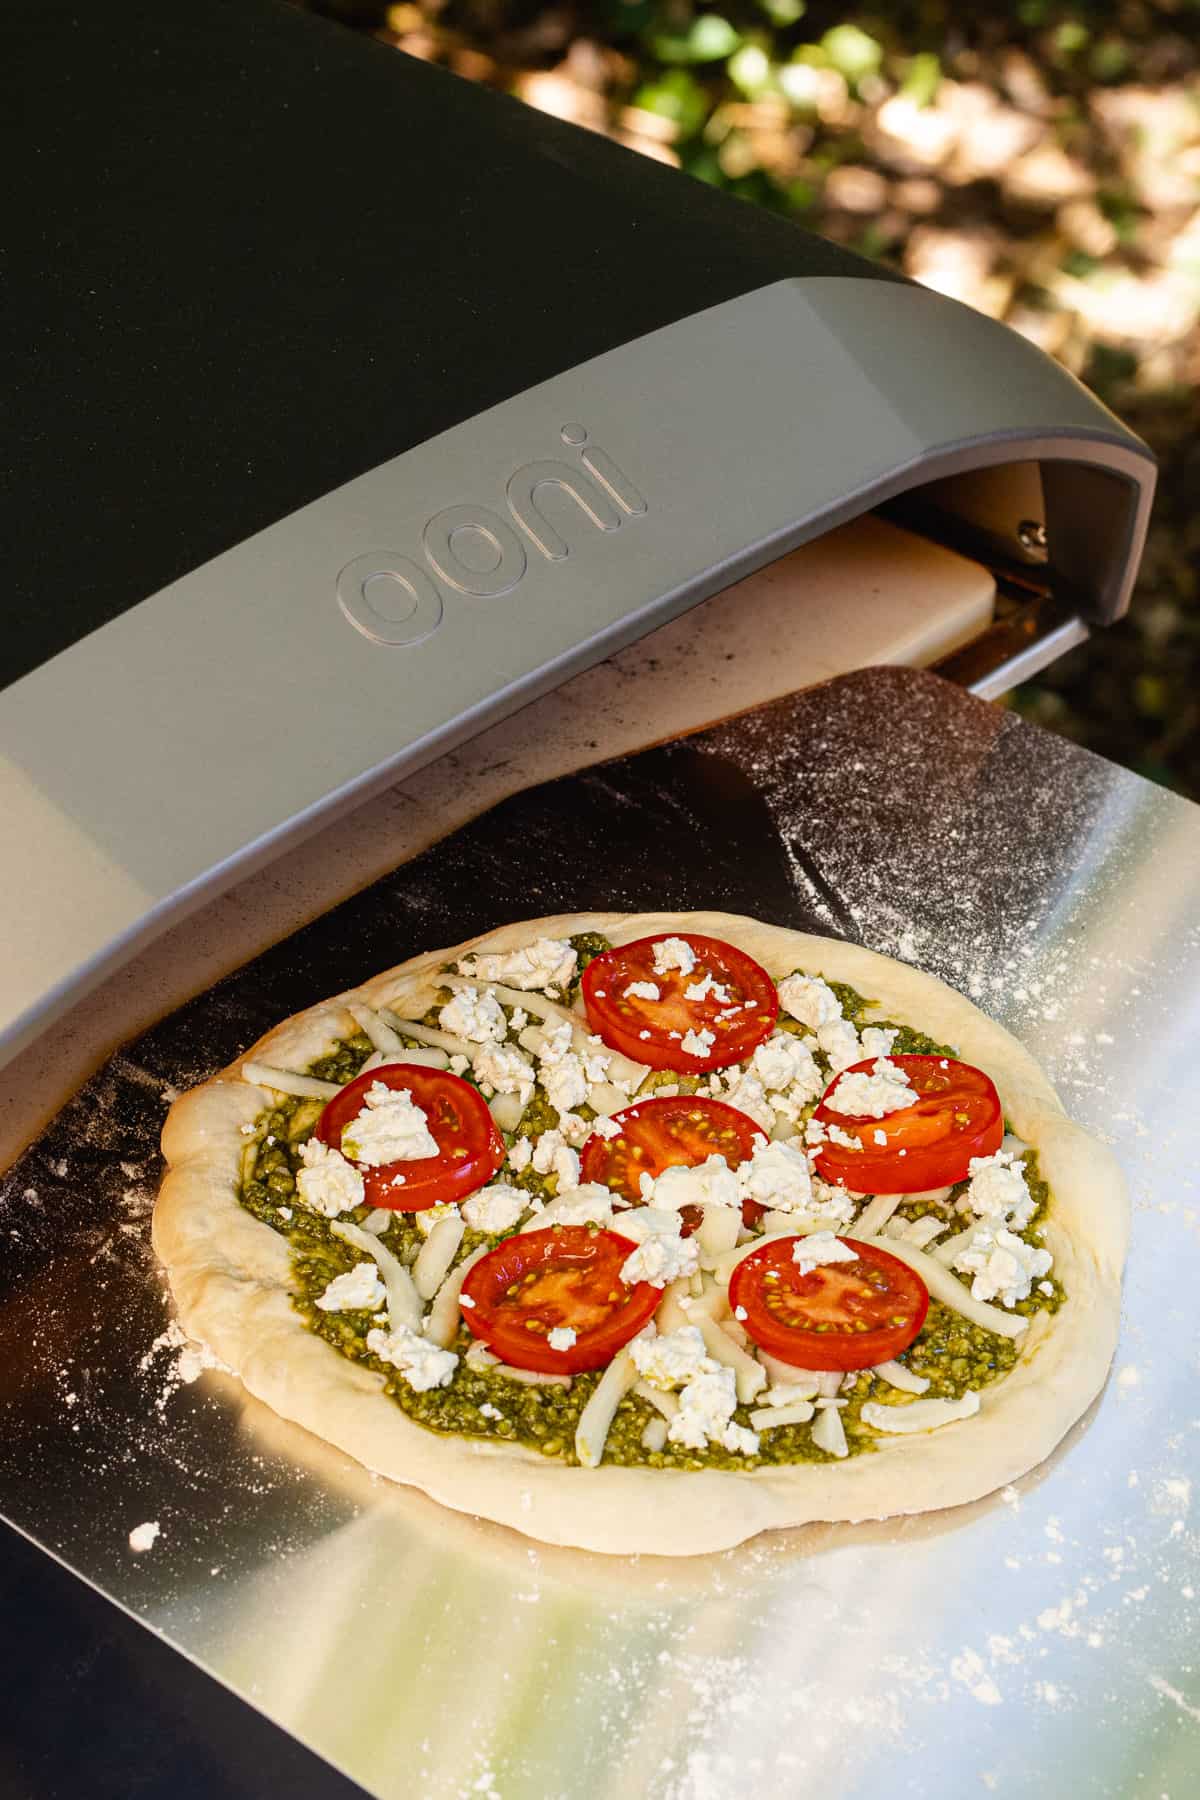 Ooni Pizza Oven Review, Tips, and Recipe